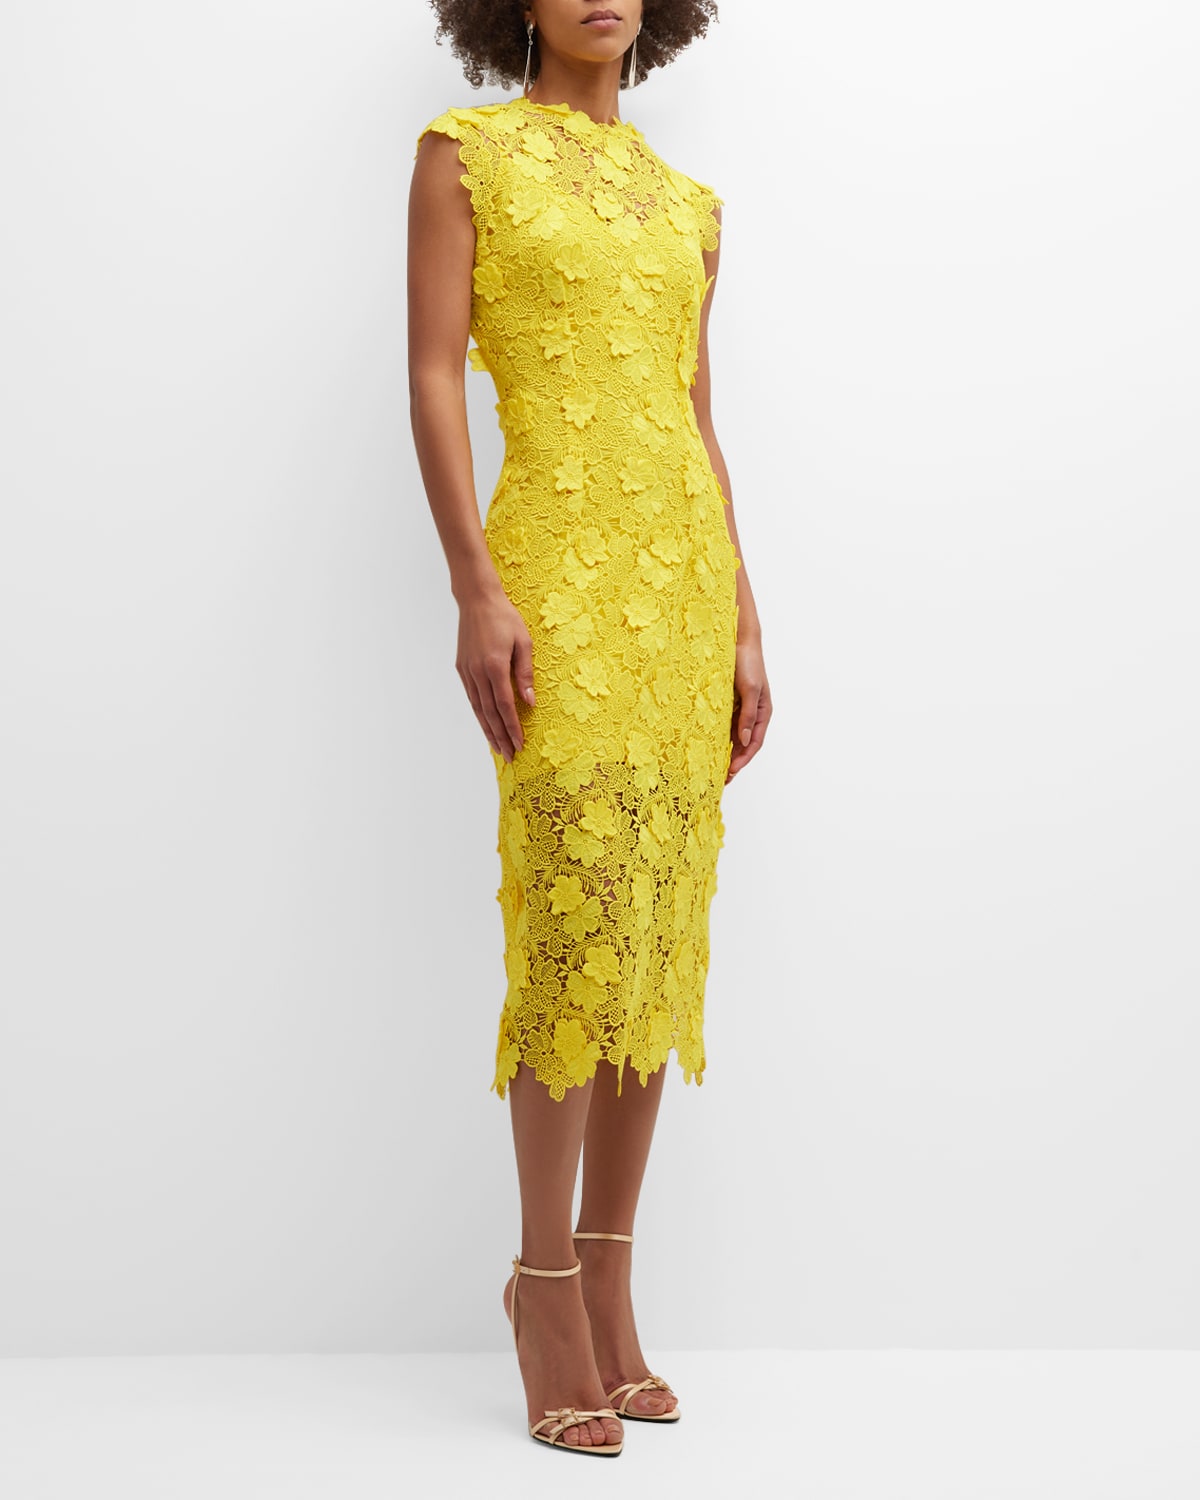 Monique Lhuillier Textured Lace Sheath Dress In Excl Yellow